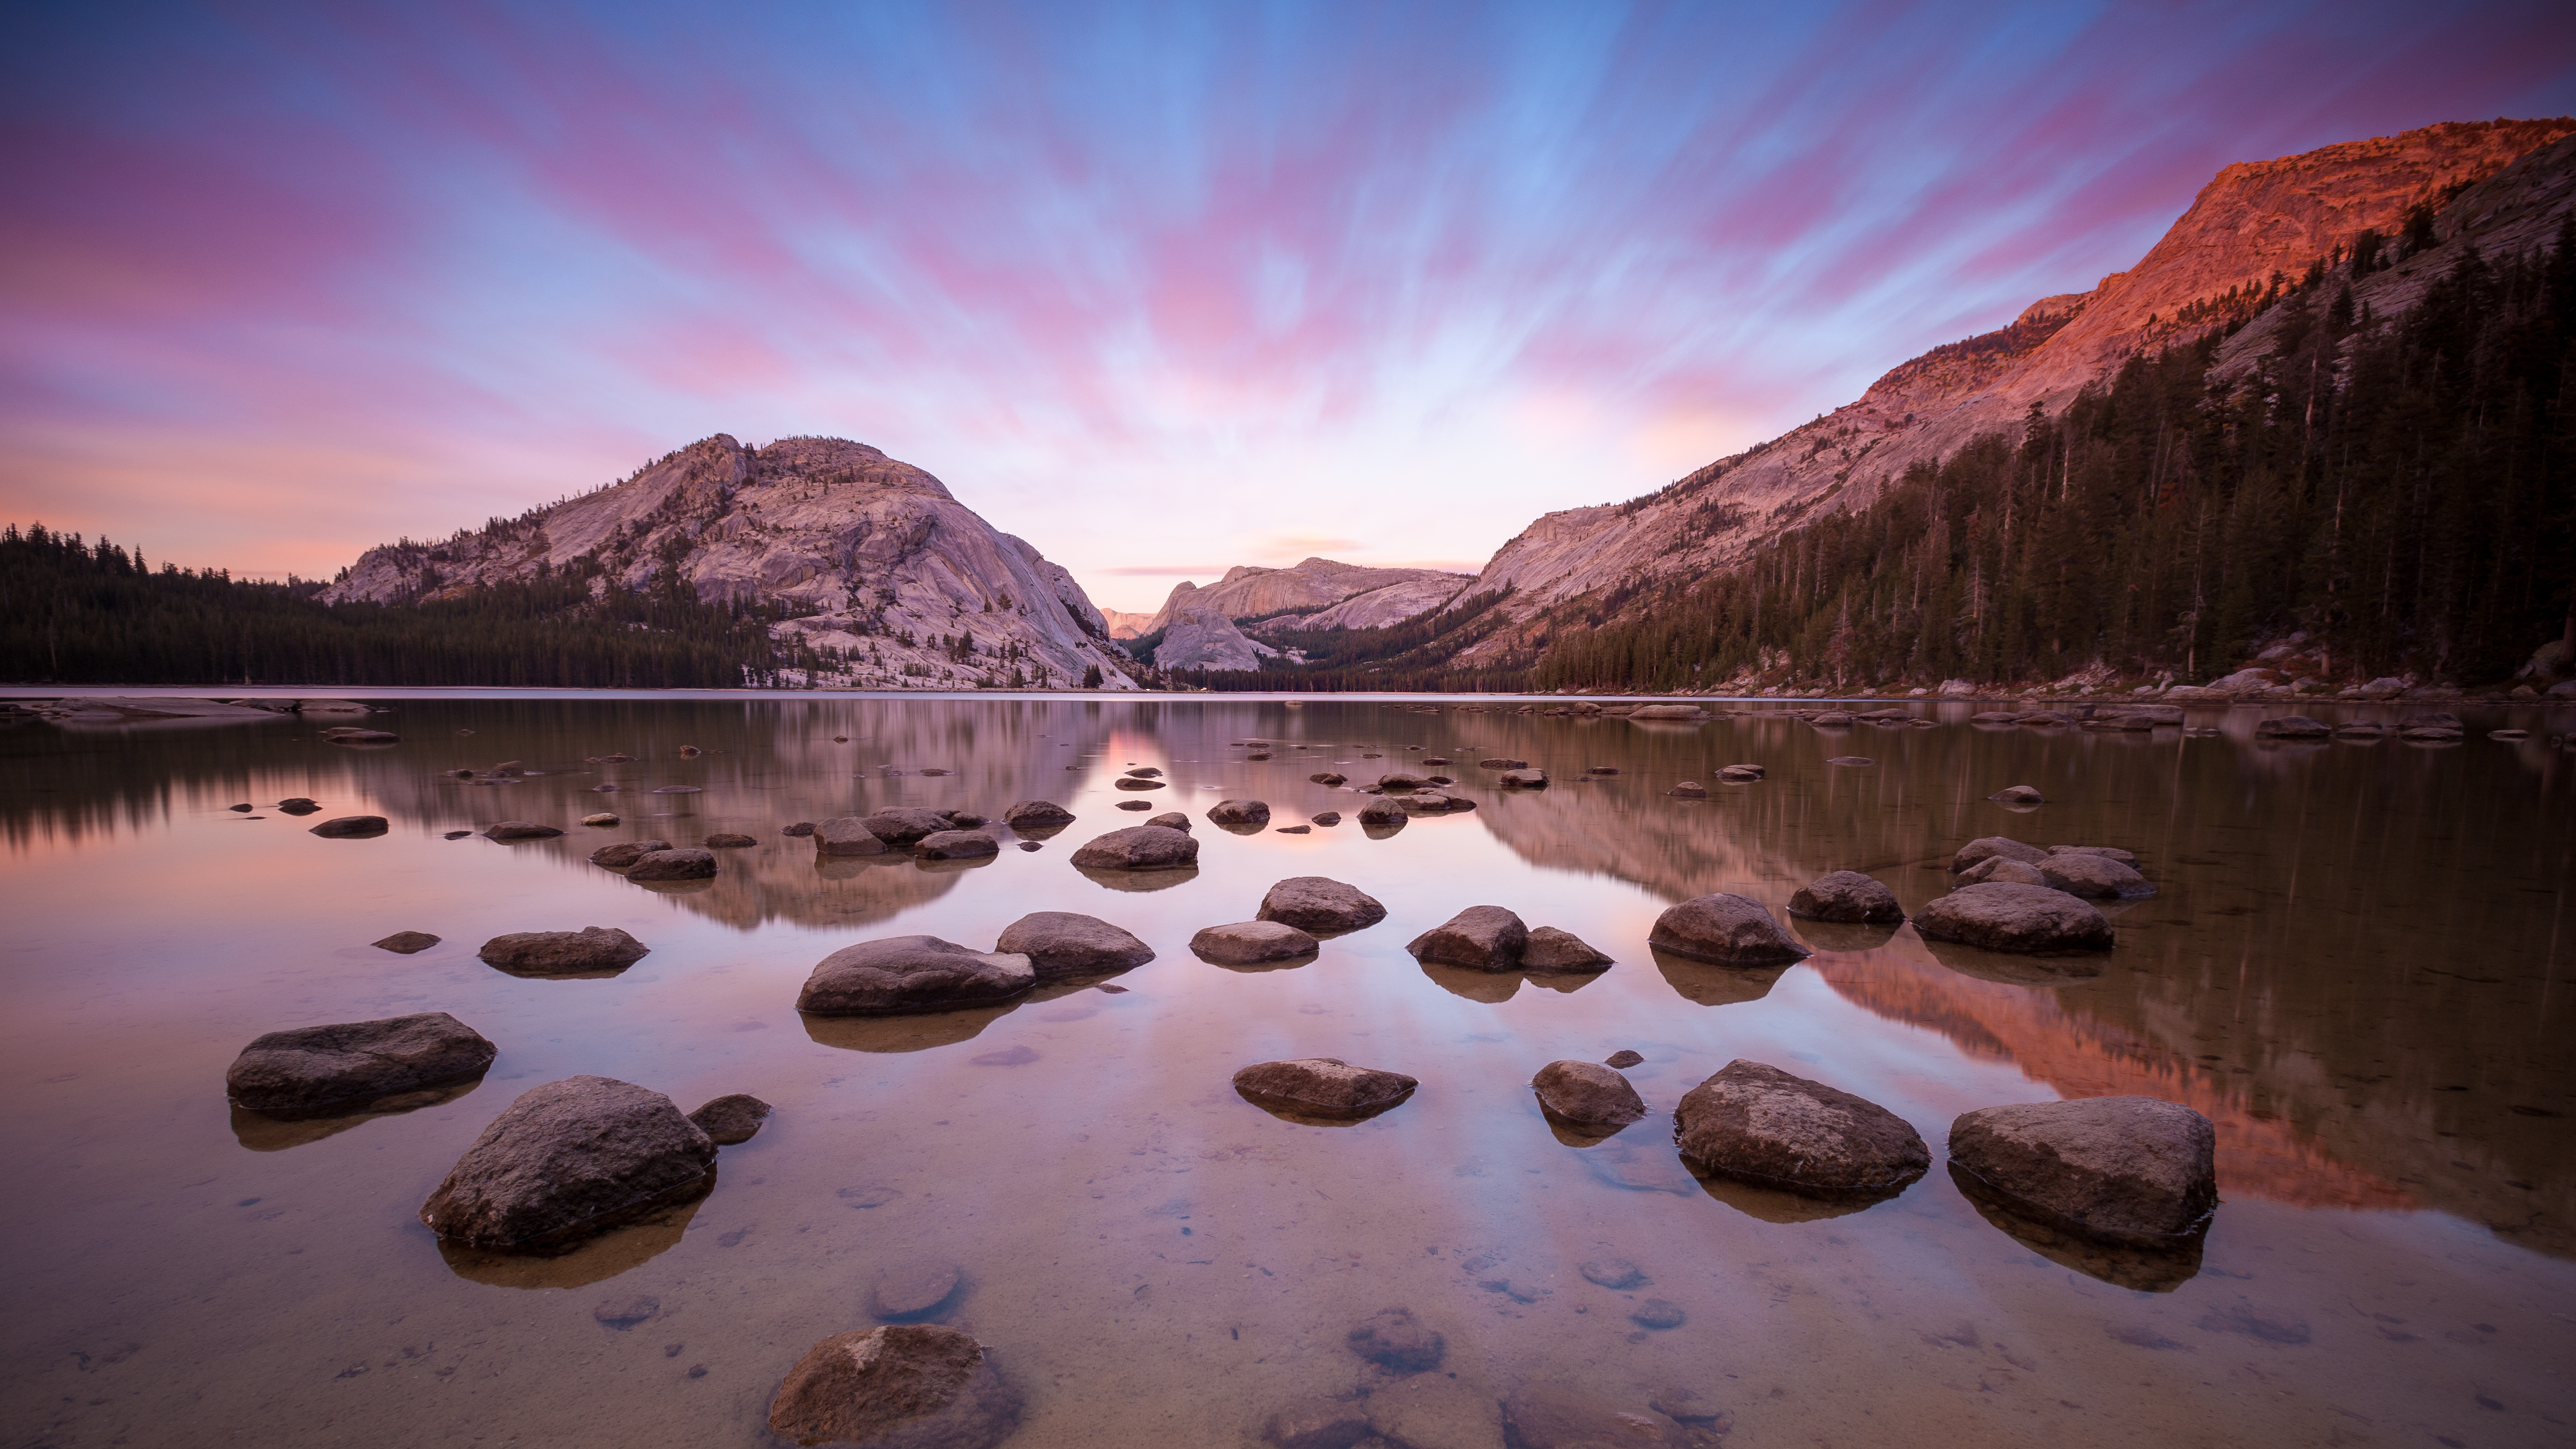 Get The Default Os X Yosemite Wallpaper They Re Beautiful